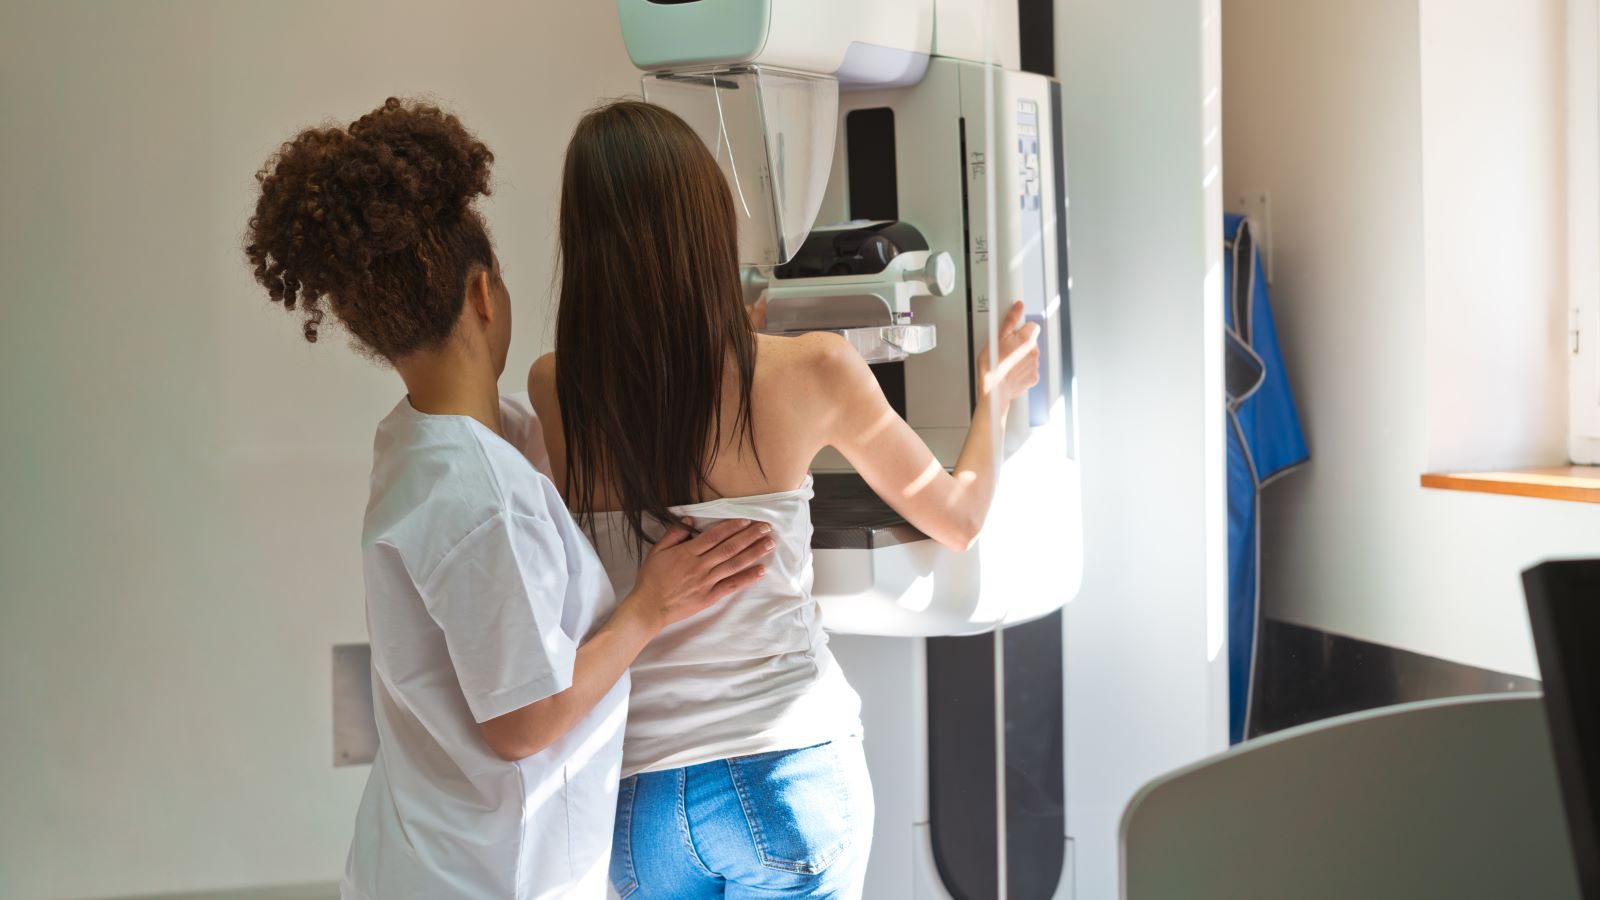 At What Age Should I Start Getting Mammograms?